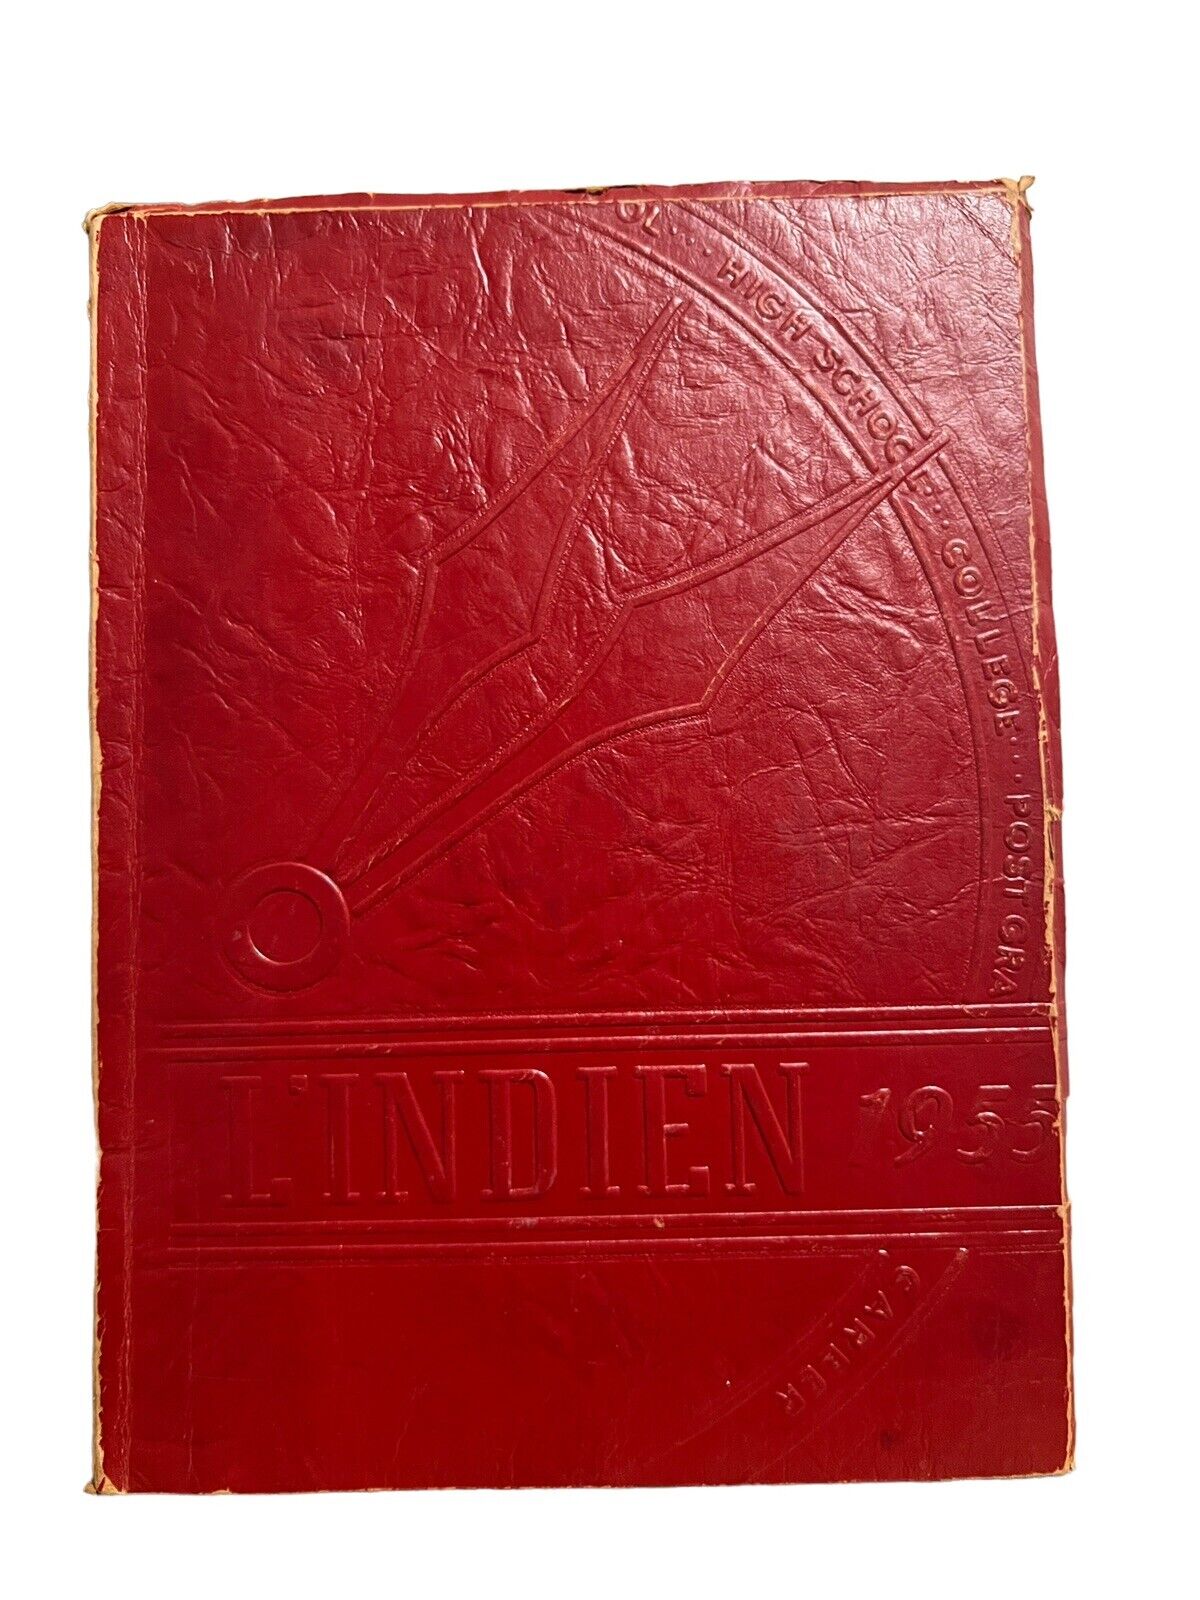 1955 Indiana Joint High School Yearbook - L'Indien - Pennsylvania PA Annual